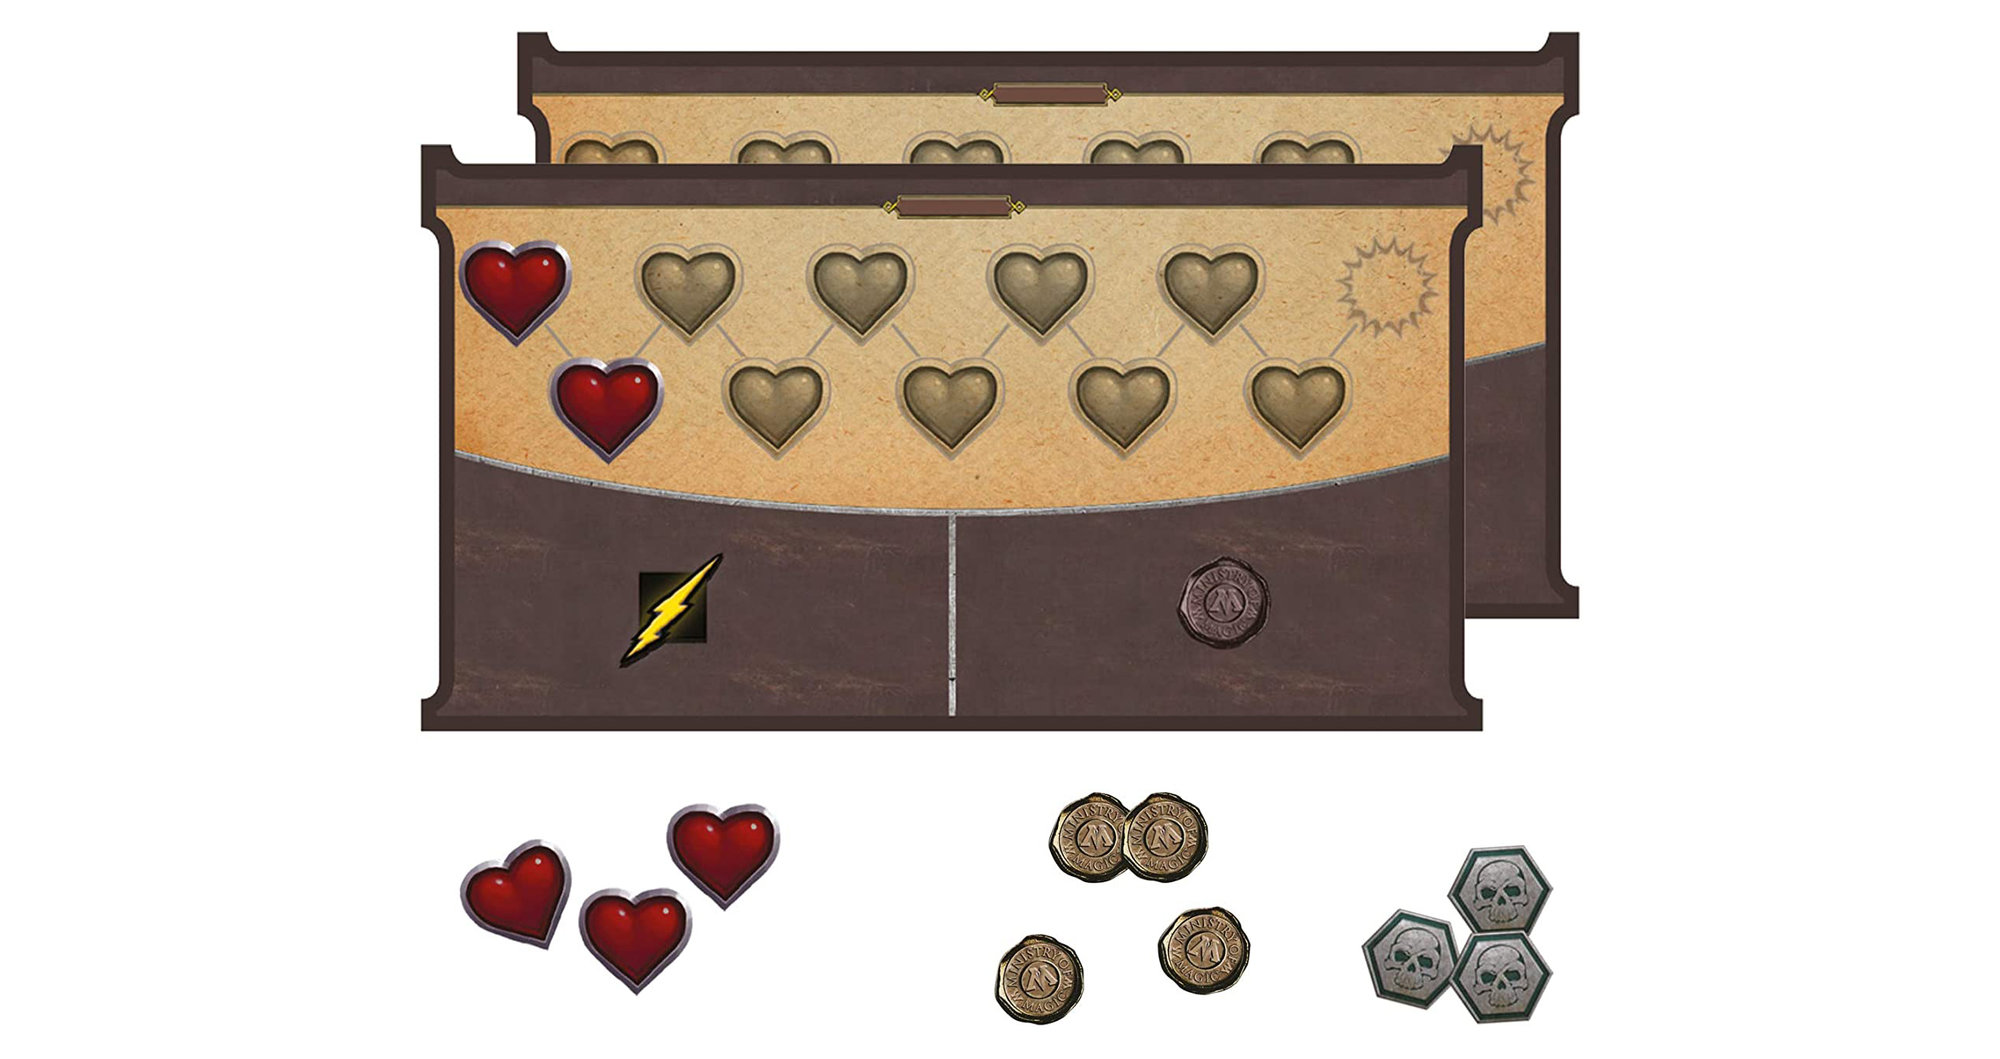 Player Boards (Game Boards)